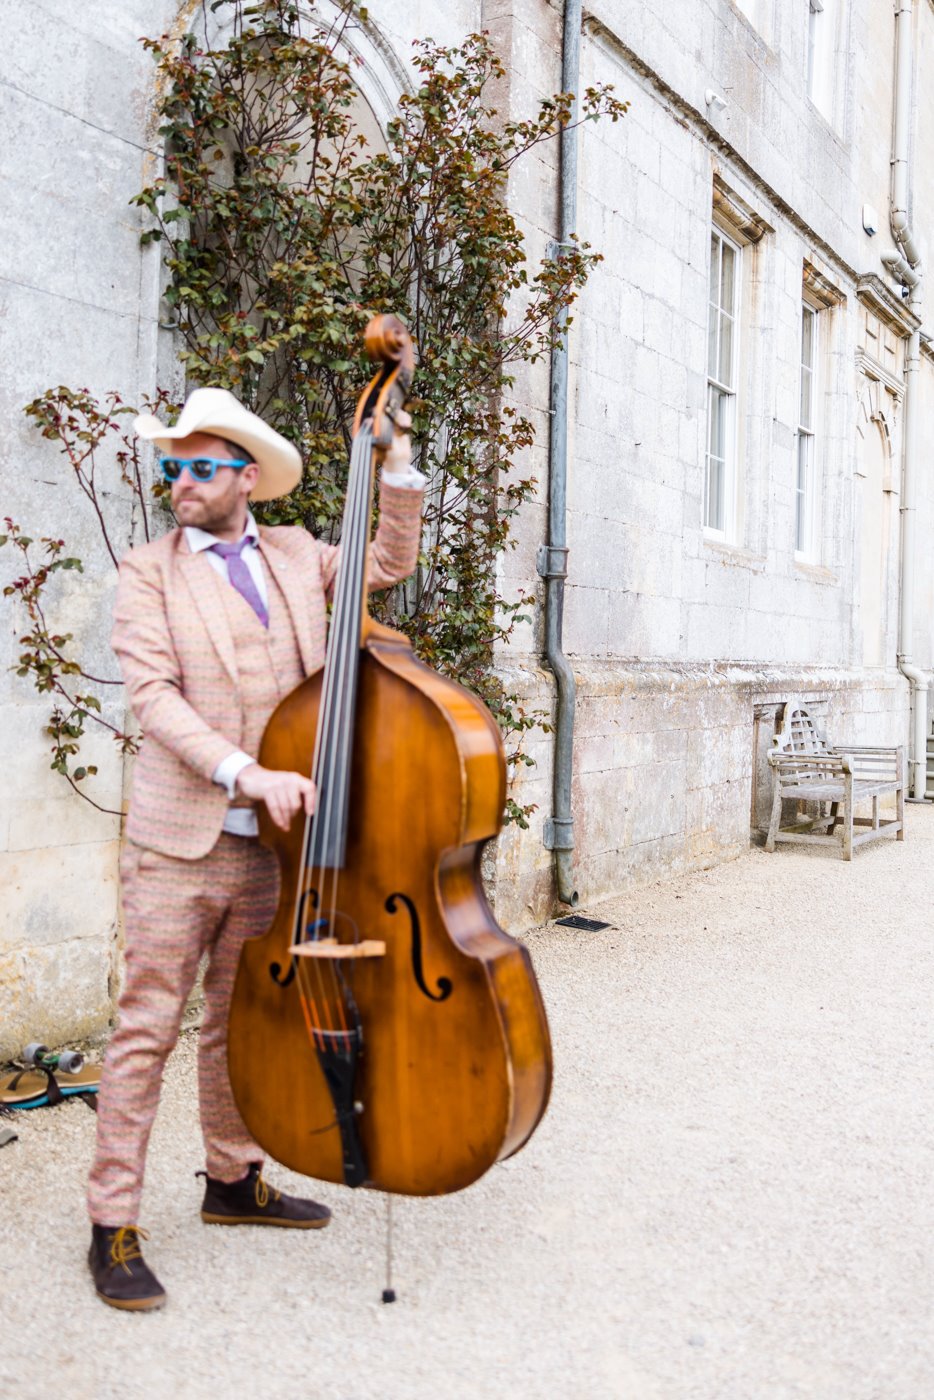 Half of the cash cows musical duo man playing double bass in pink suit and cowboy hat and blue plastic sunglasses in front of mansion house wedding venue elmore court